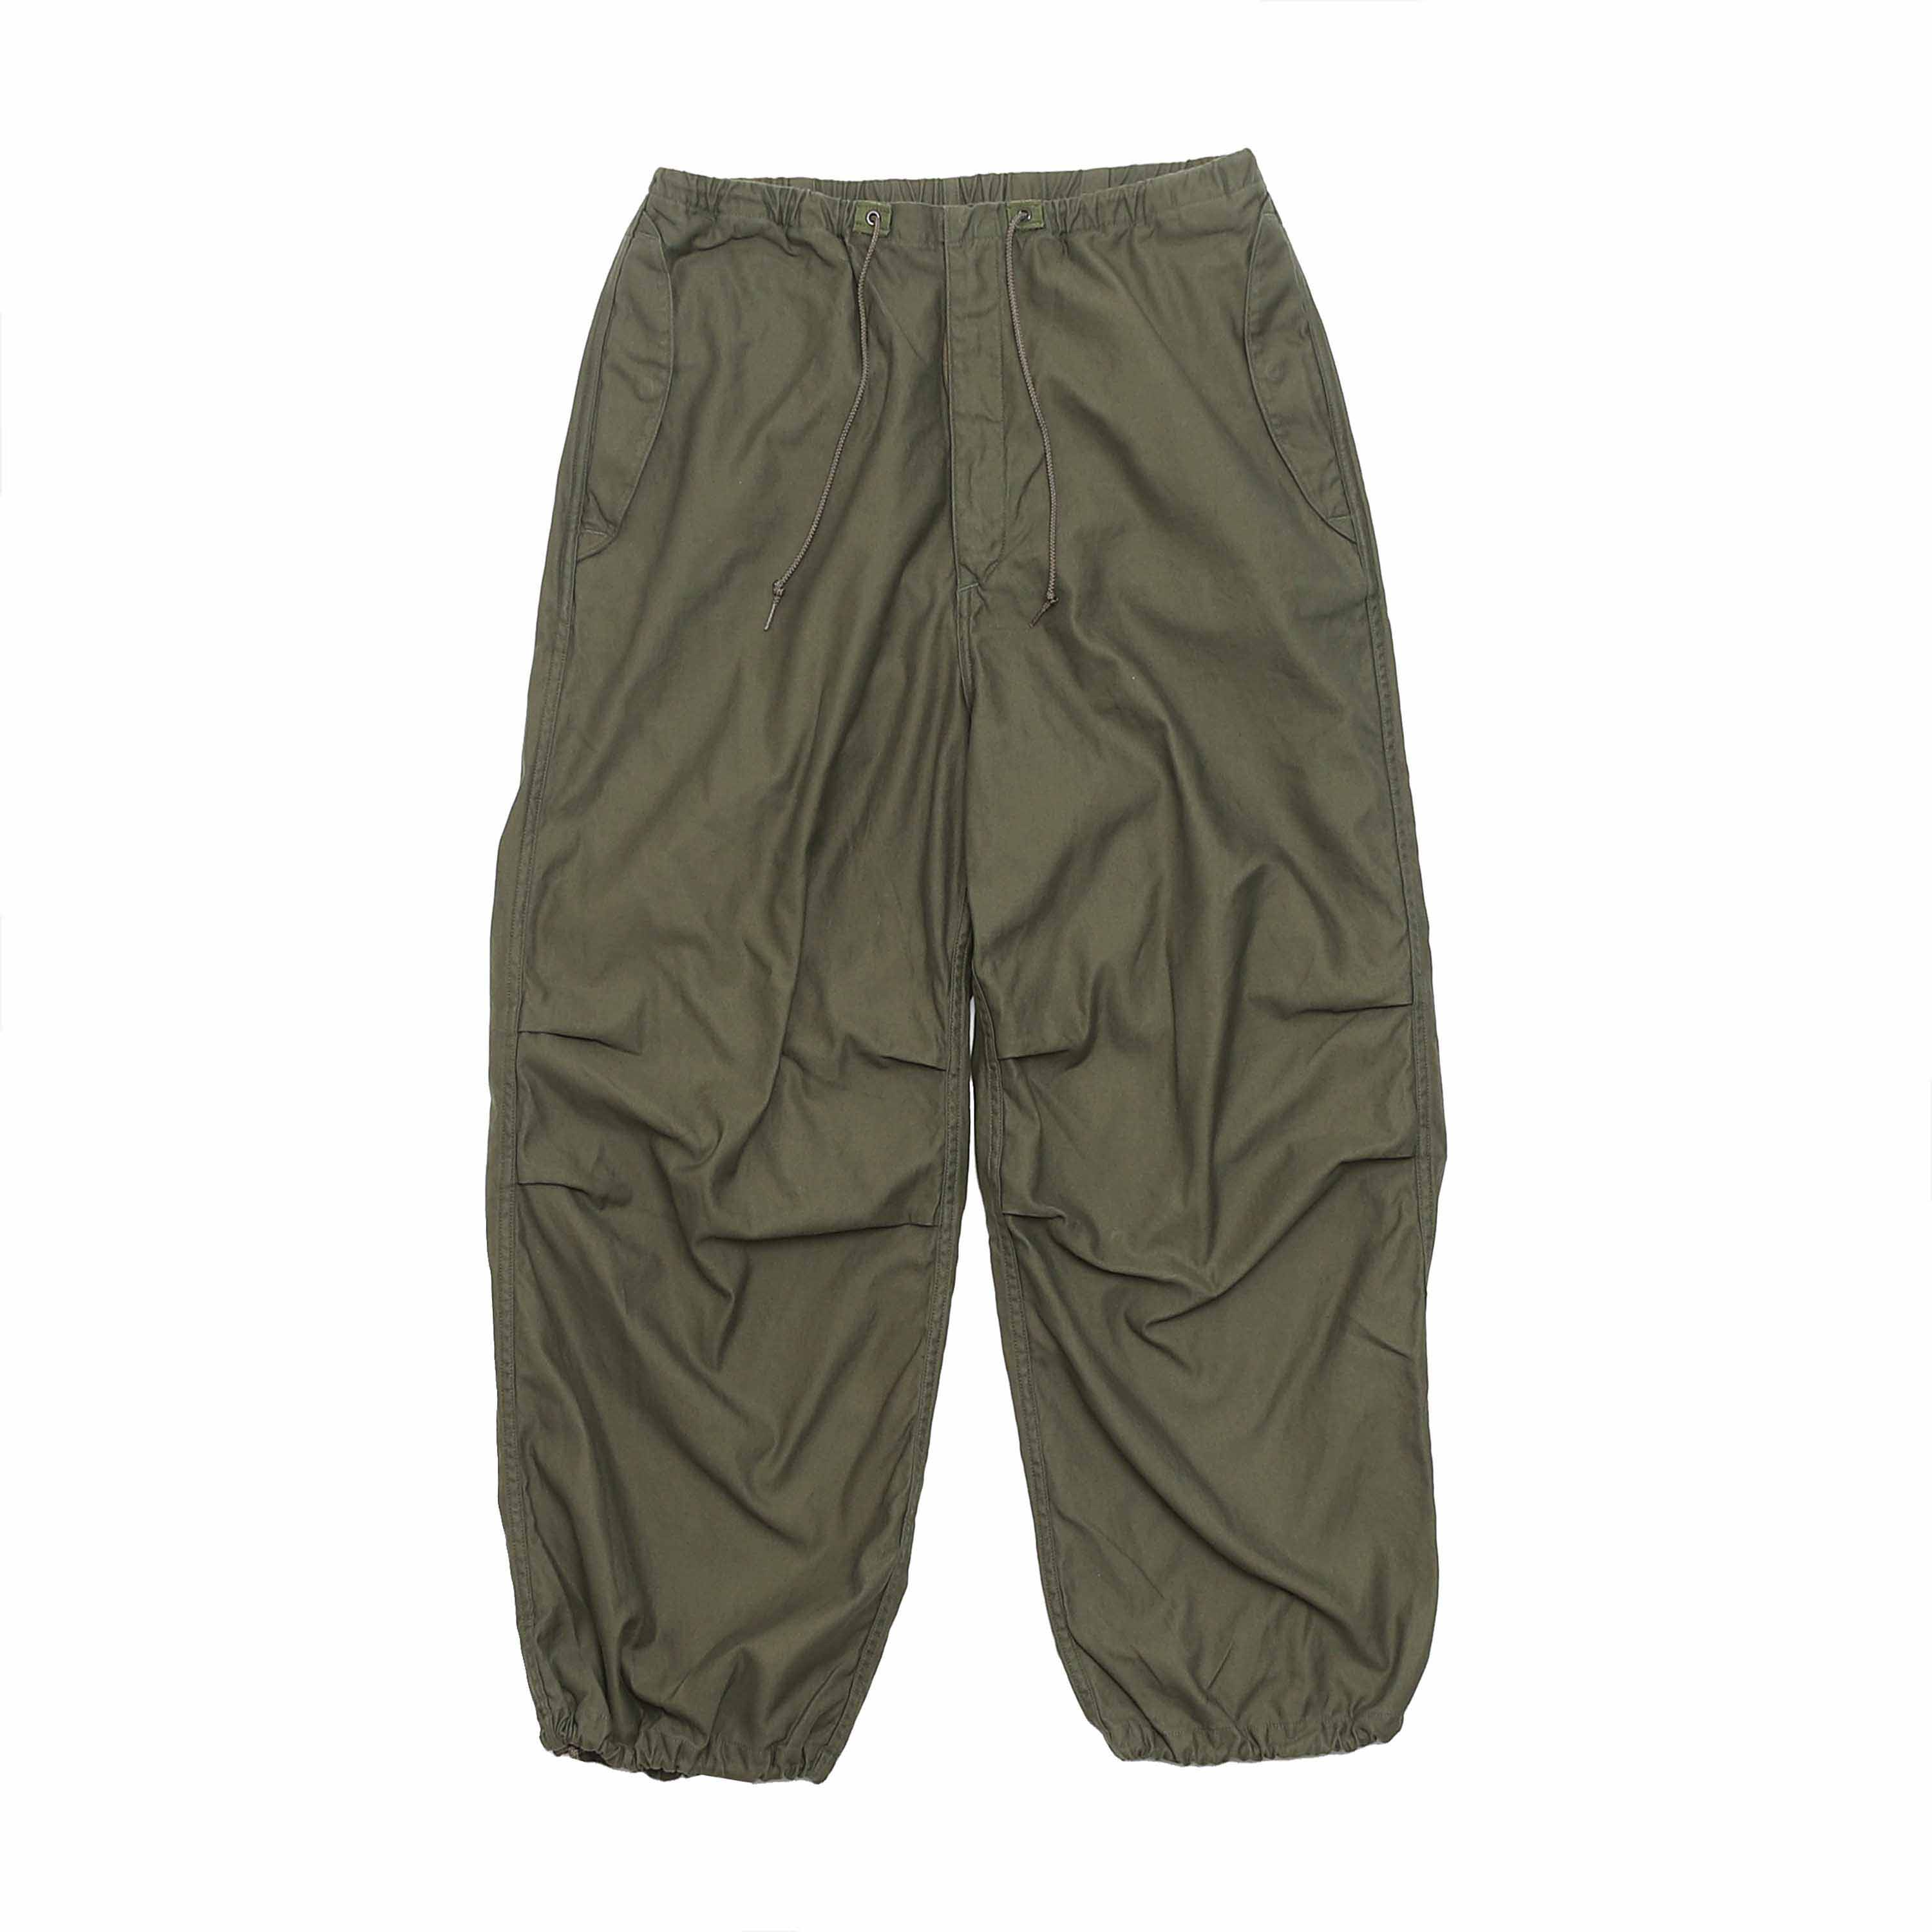 LOOSE FIT ARMY TROUSER - ARMY GREEN